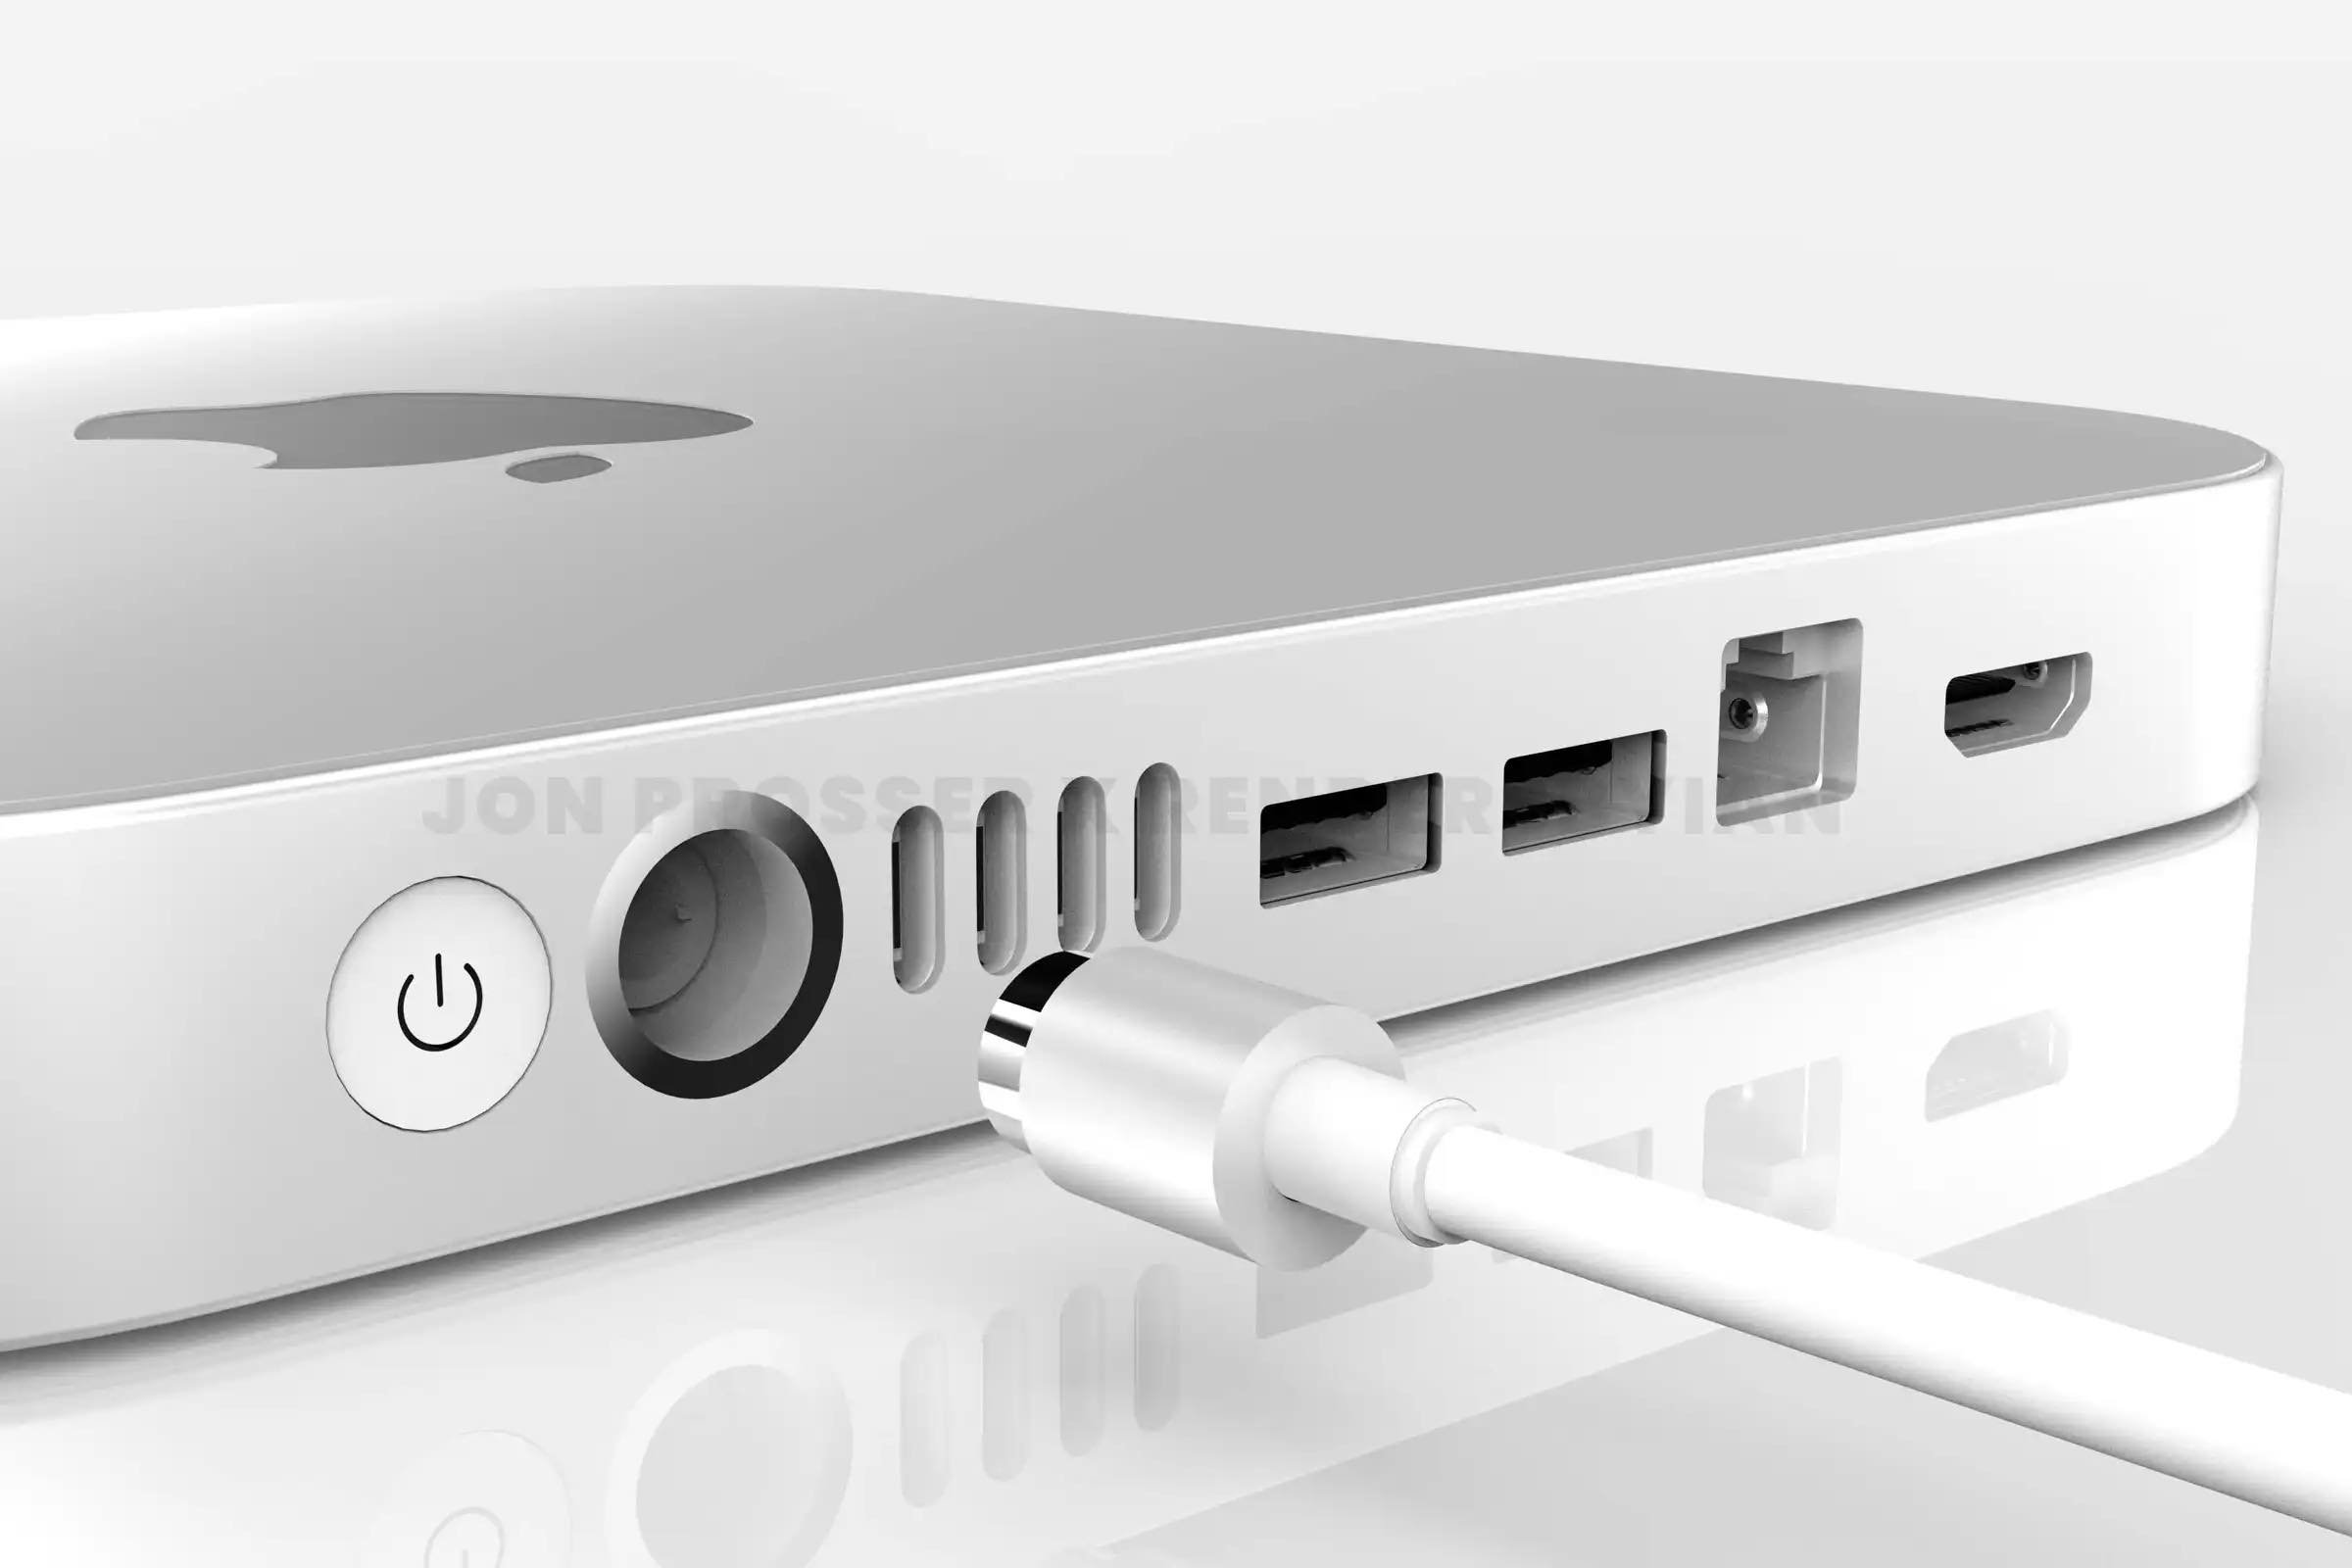 Apple Mac mini M1 Pro And M1 Max - What We Know | Production Expert